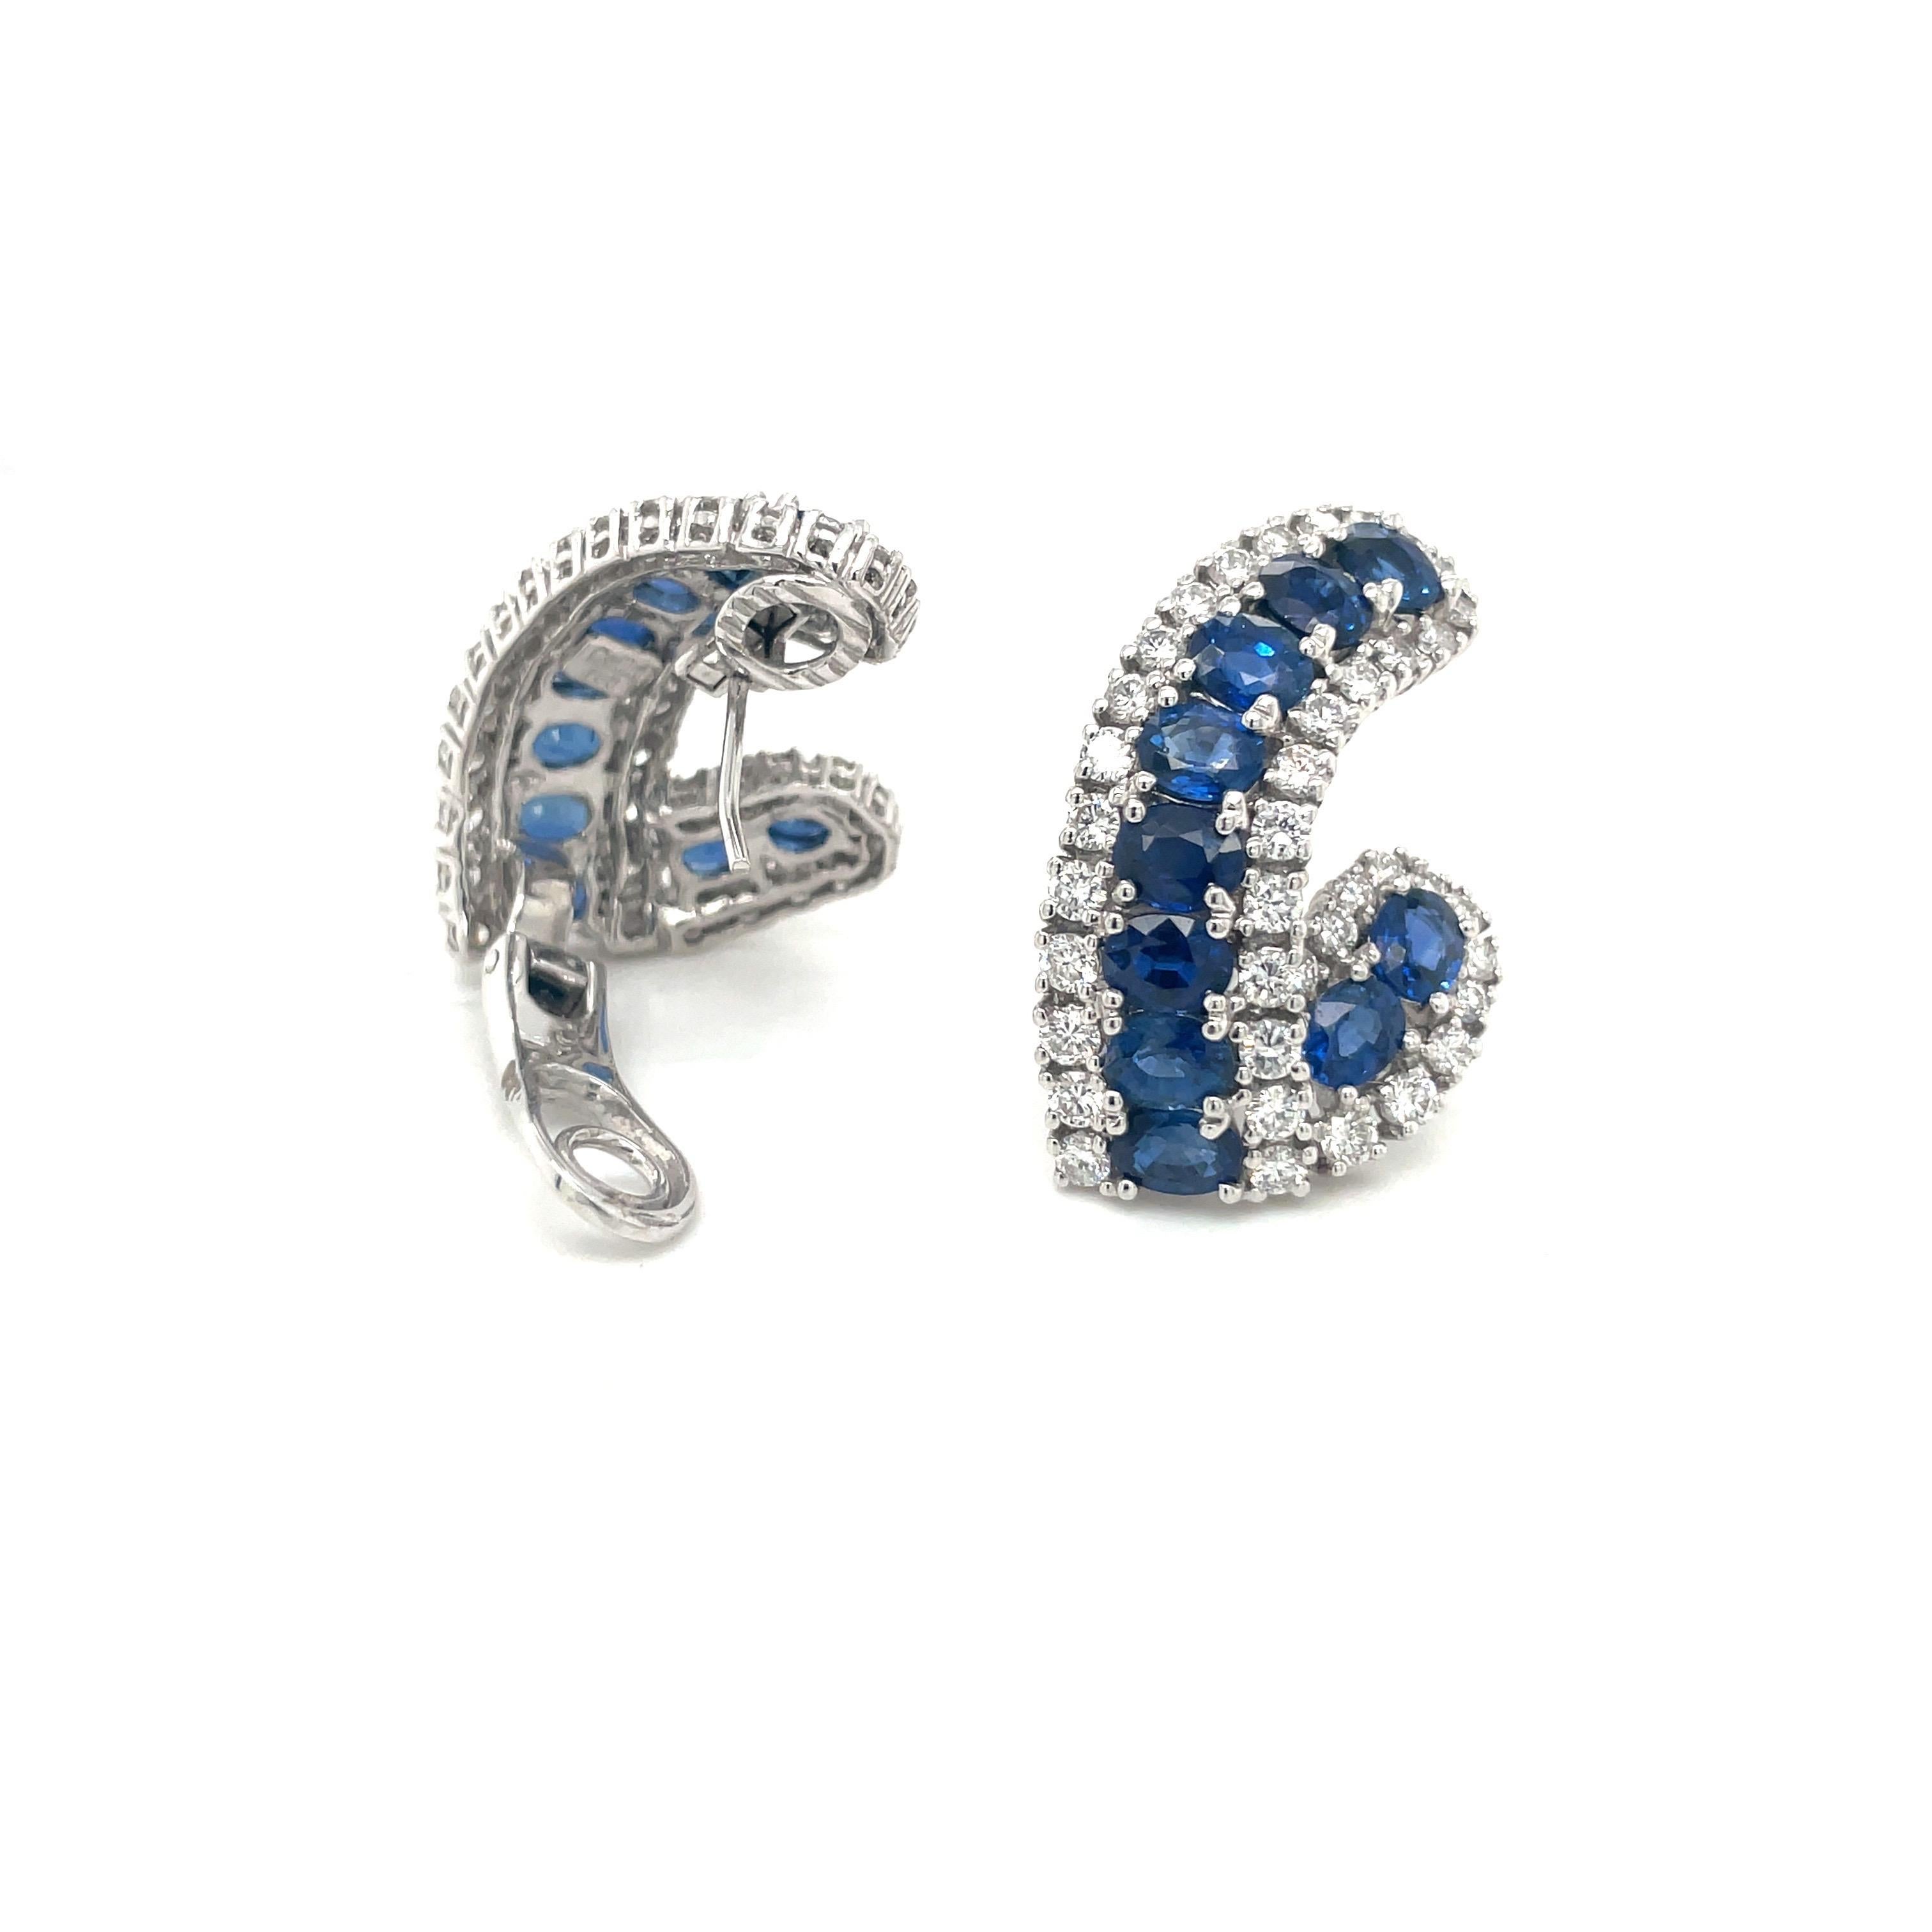 Oval Cut 18KT White Gold 9.38Ct Blue Sapphire 2.97Ct. Diamond Earrings For Sale